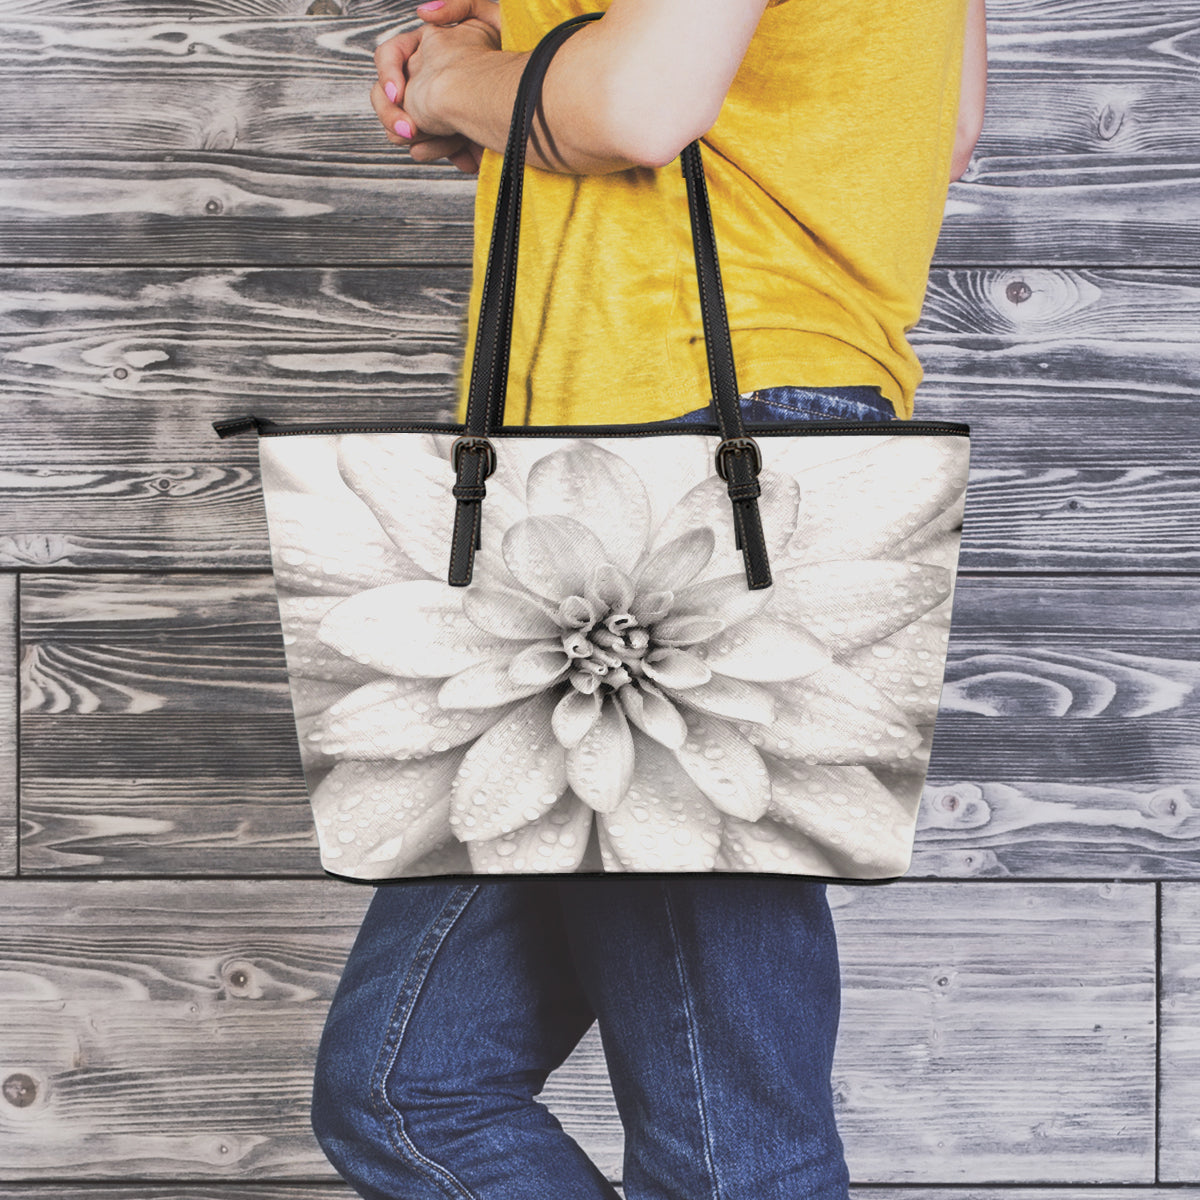 Dahlia Flower Large Leather Tote Bag